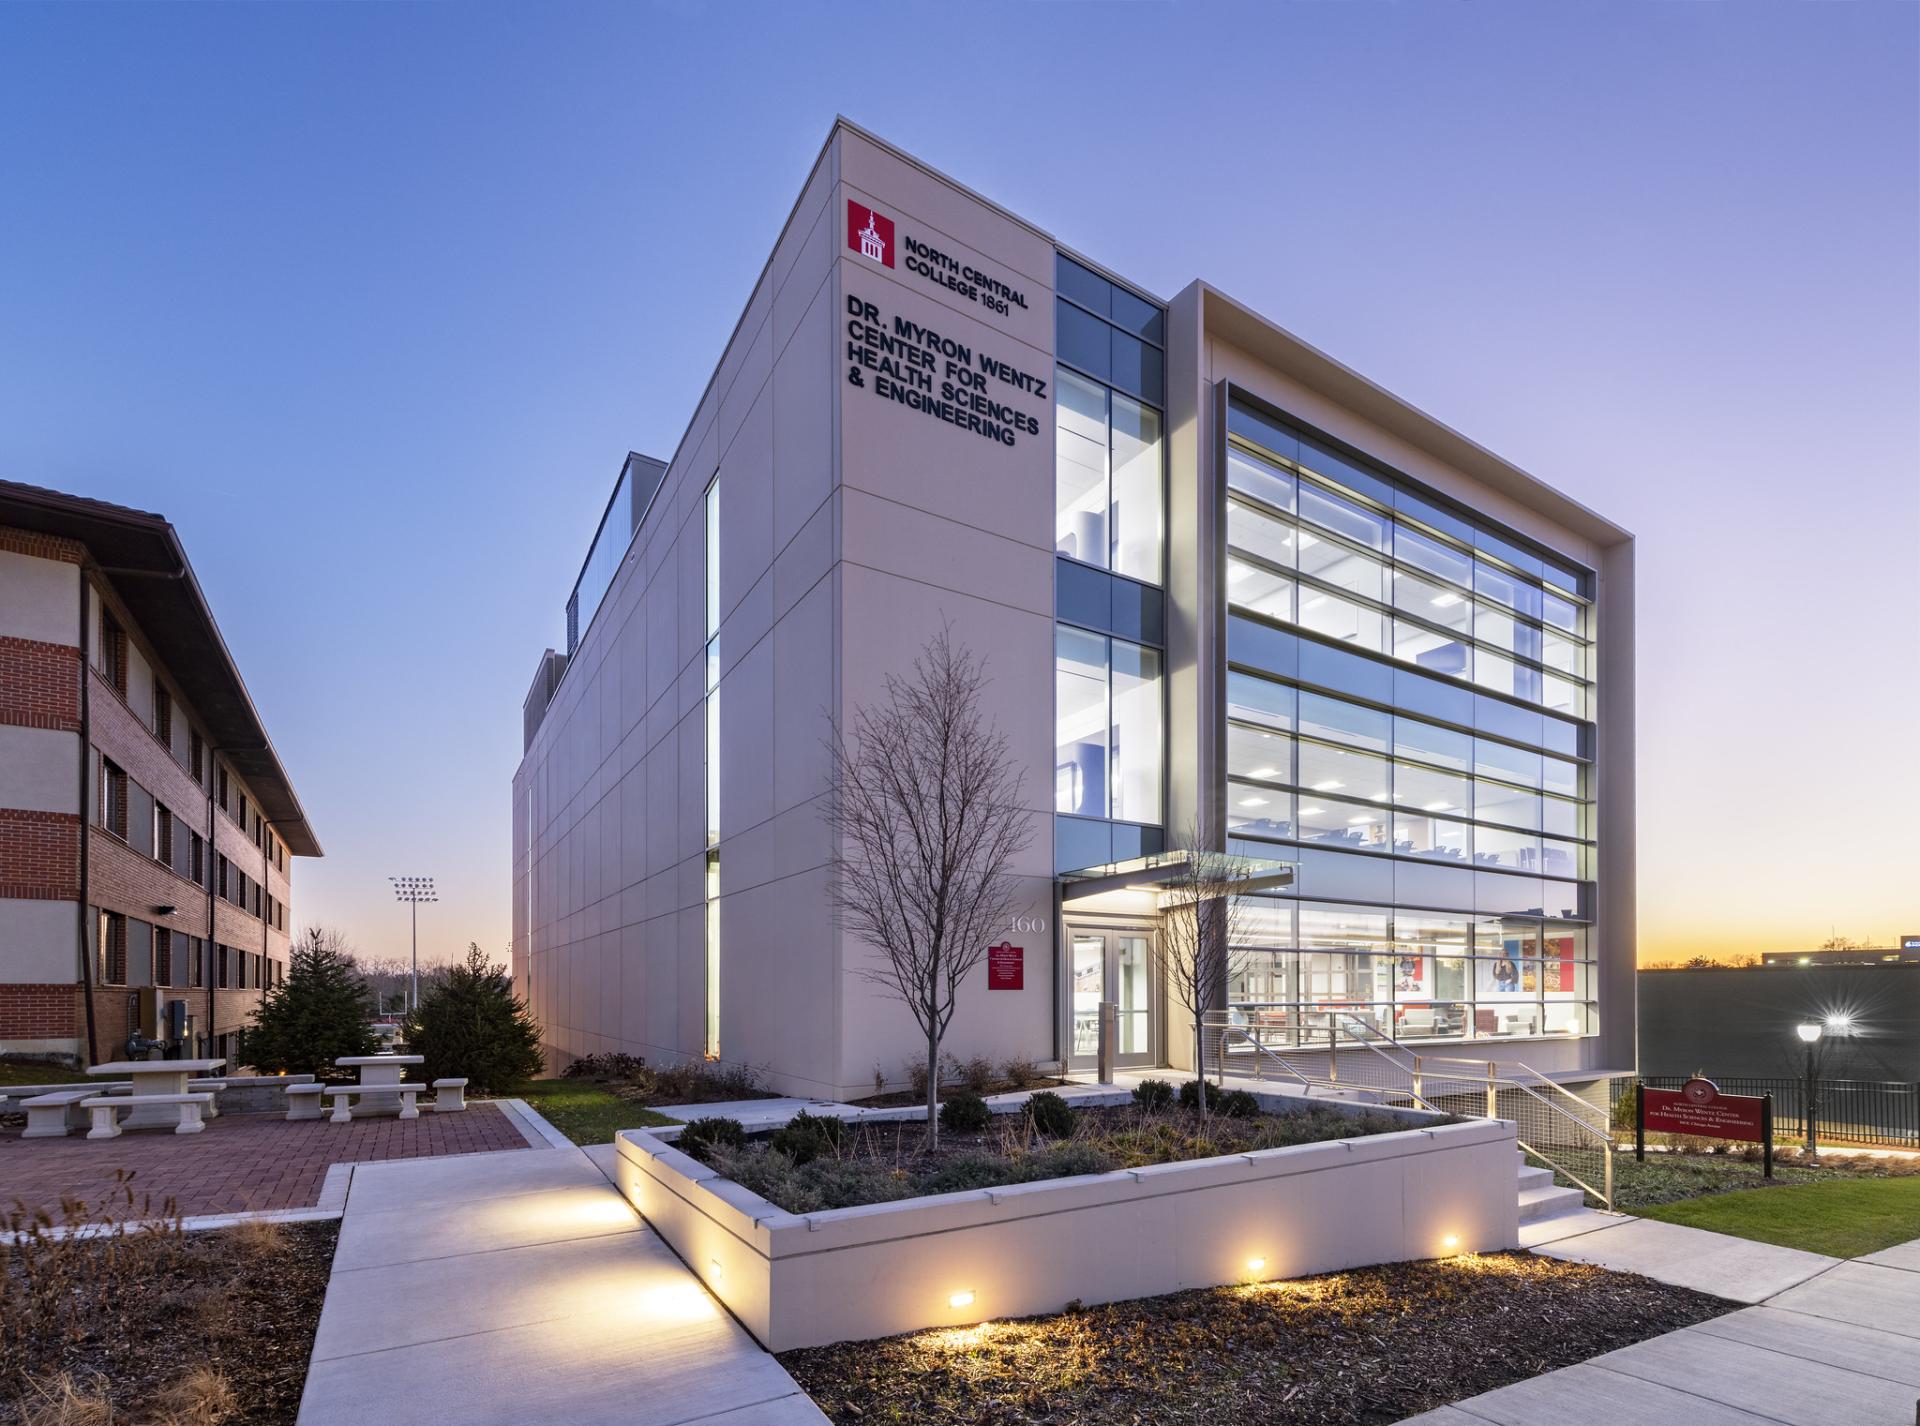 Exterior photo of the Dr. Myron Wentz Center for Health Sciences and Engineering building